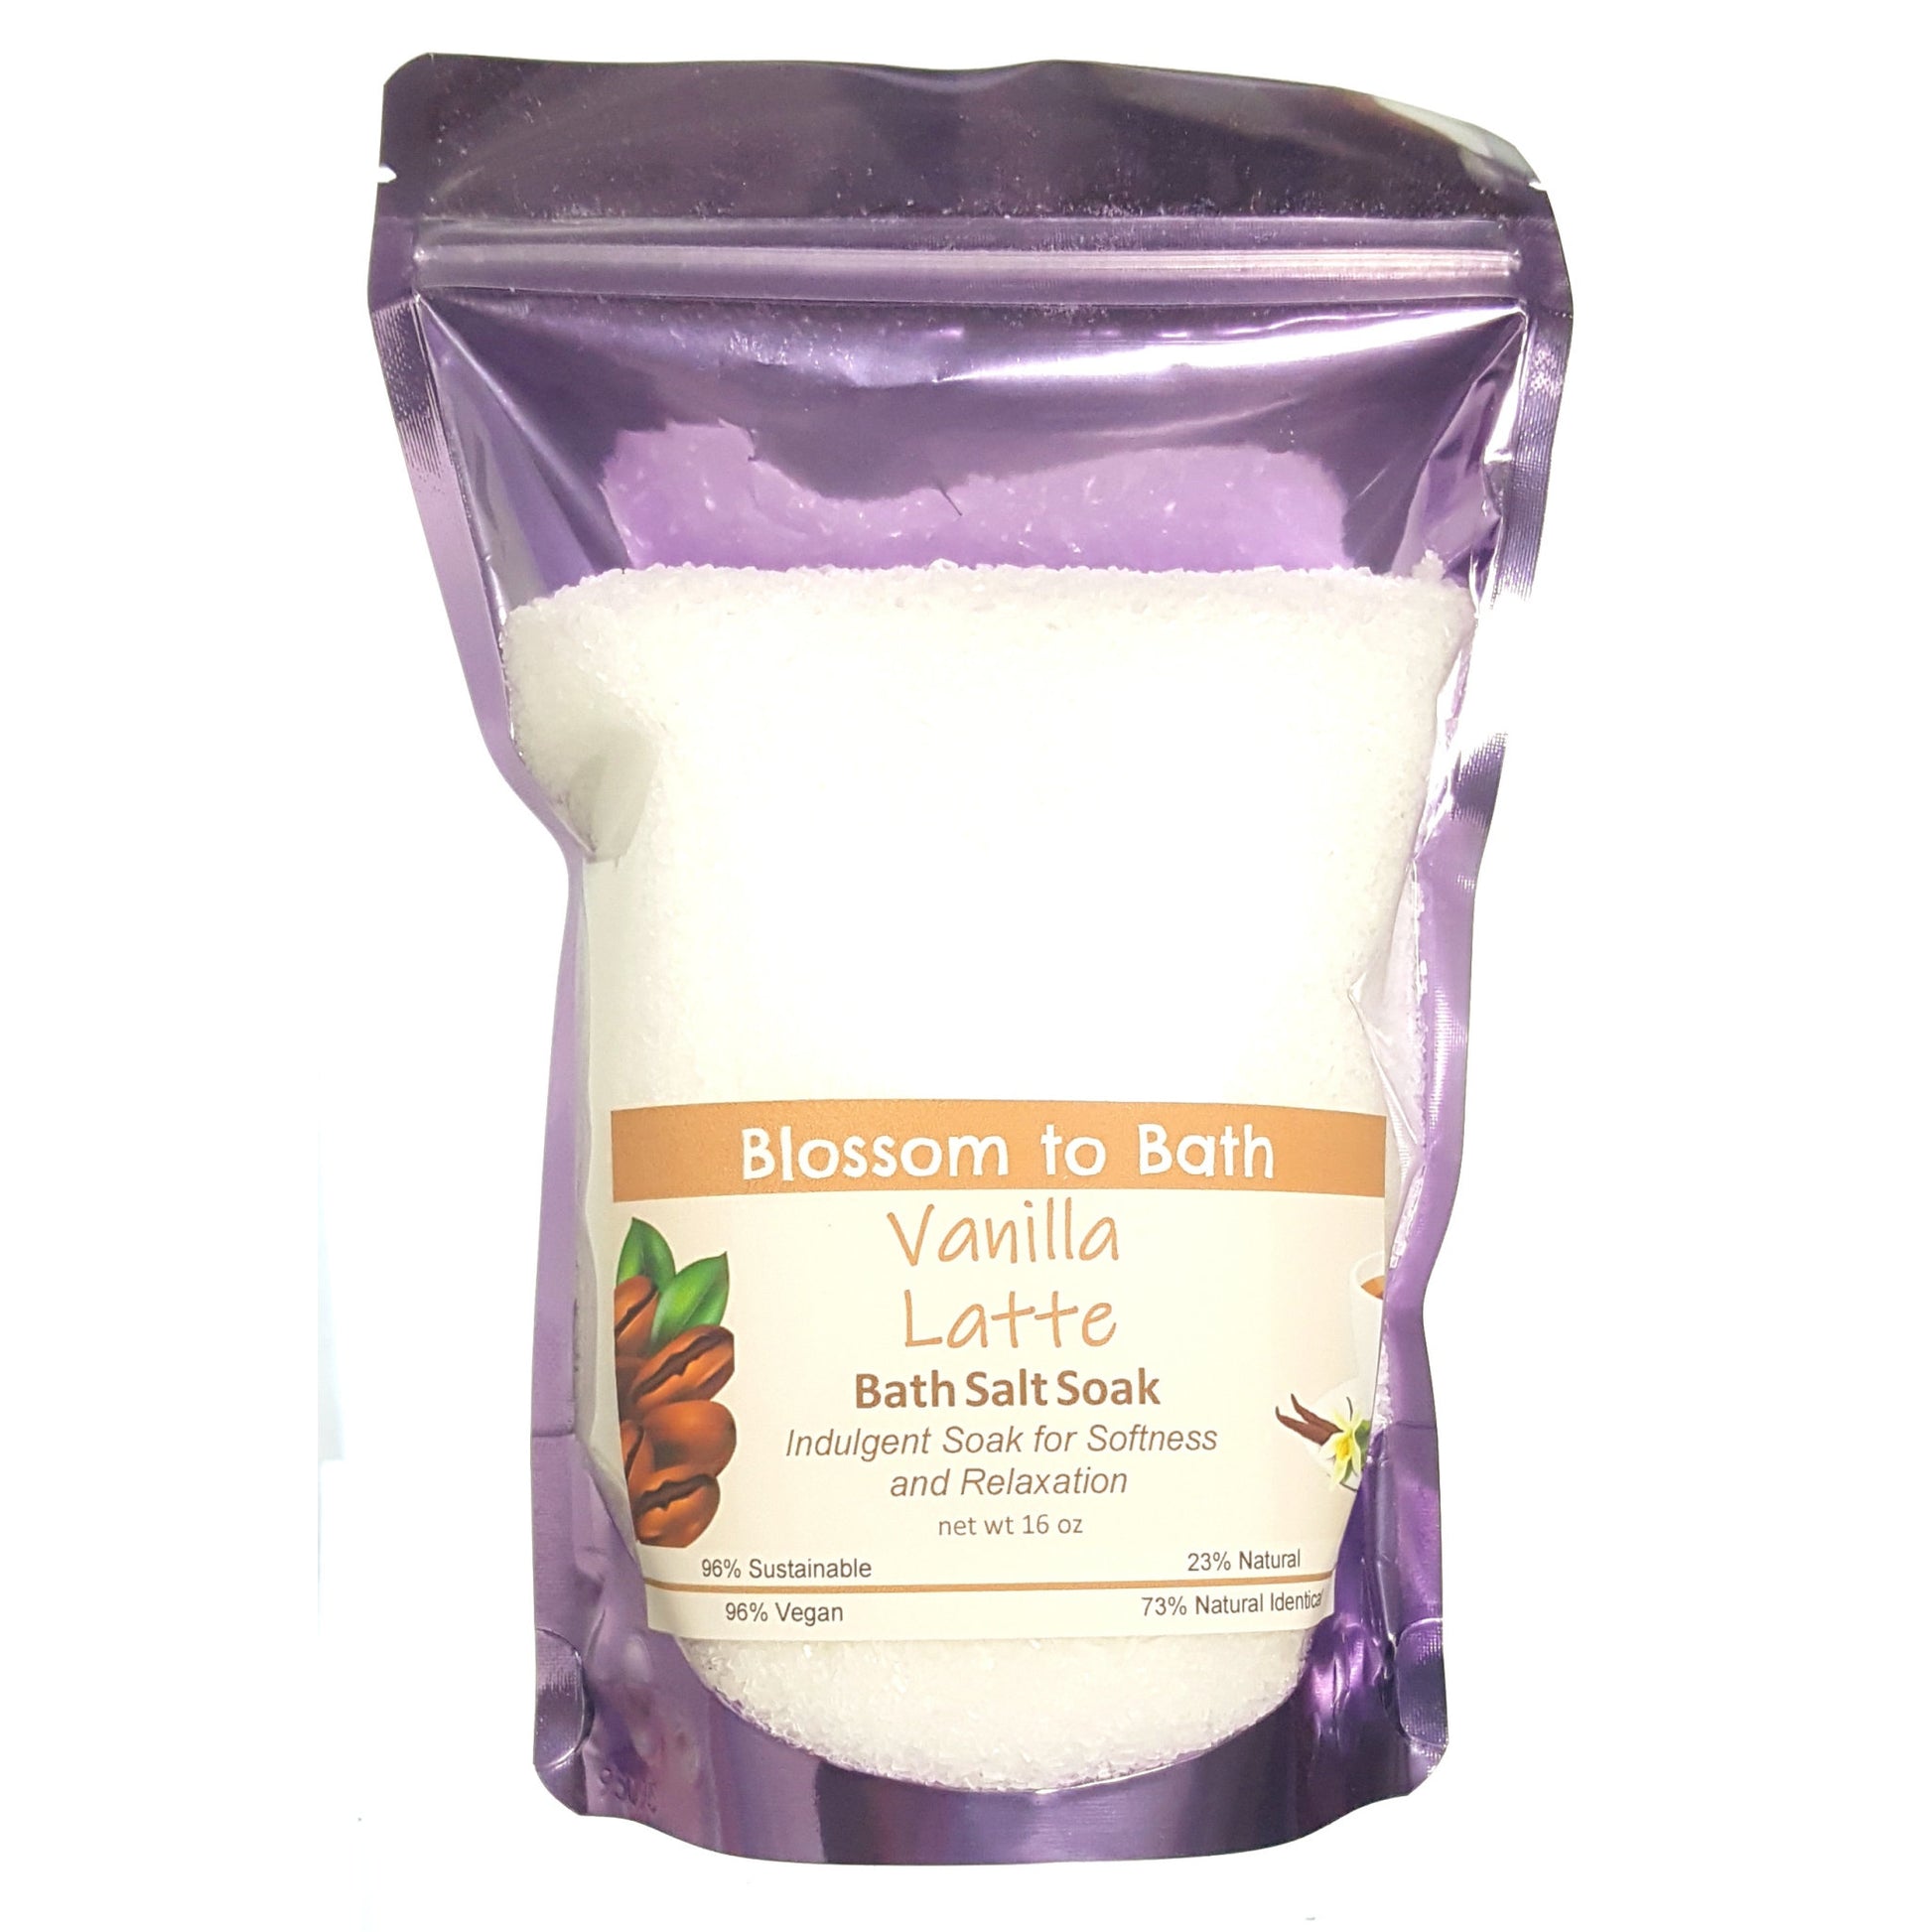 Buy Blossom to Bath Vanilla Latte Bath Salt Soak from Flowersong Soap Studio.  Scented epsom salts for a luxurious soaking experience  Sweetened vanilla combines with rich coffee to form the classic latte scent.